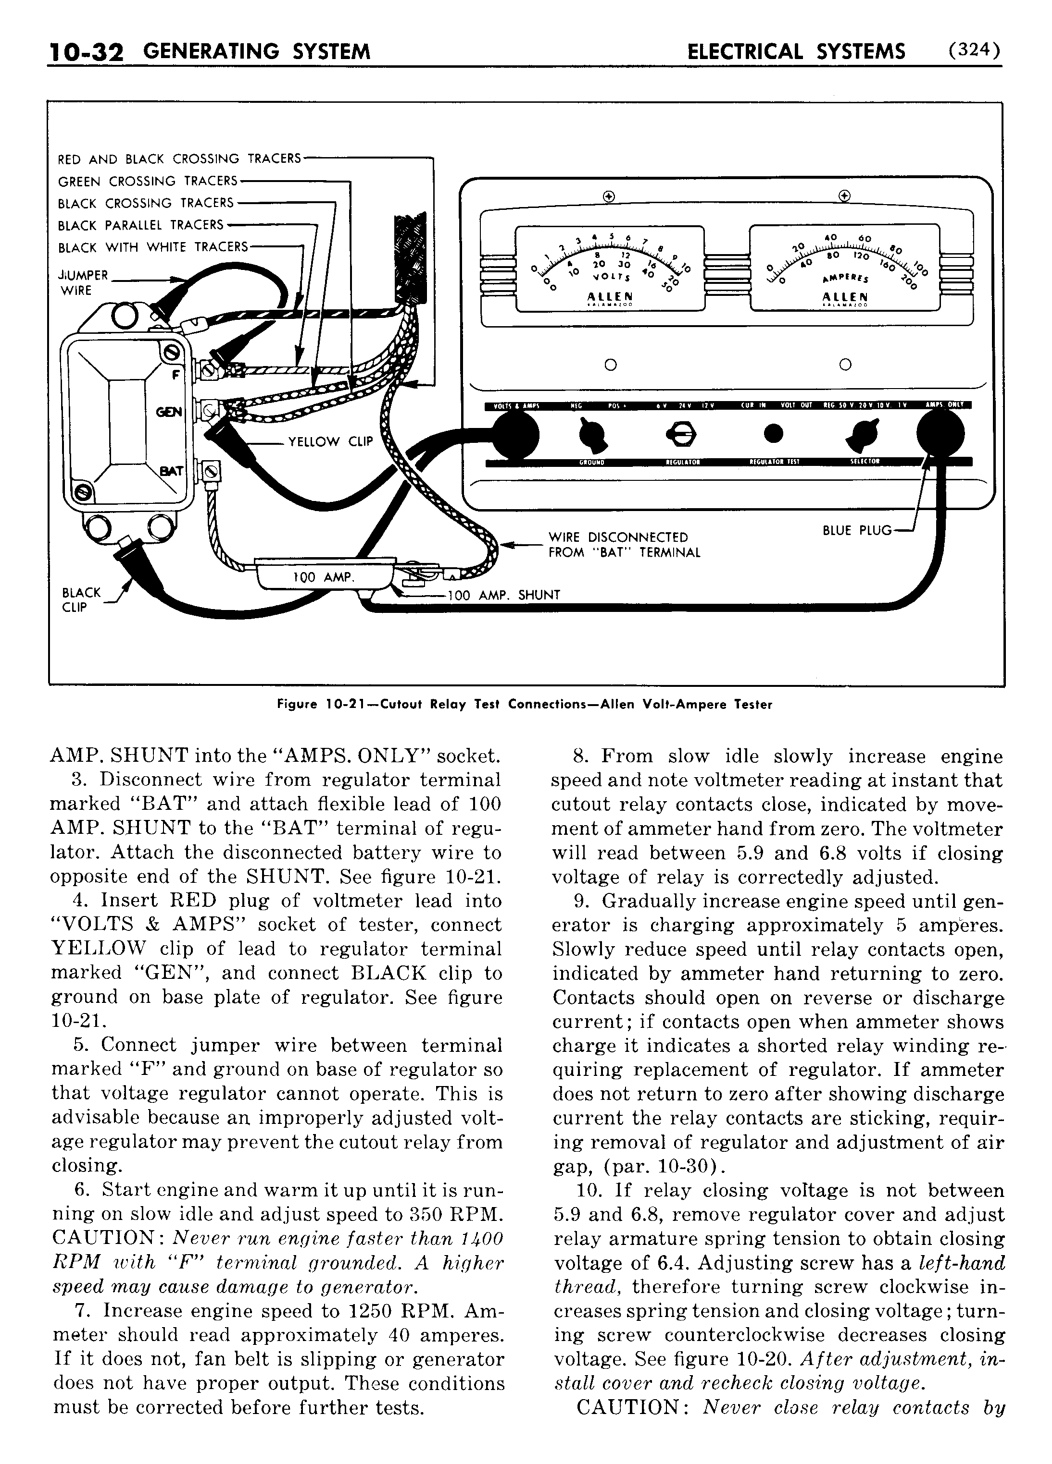 n_11 1951 Buick Shop Manual - Electrical Systems-032-032.jpg